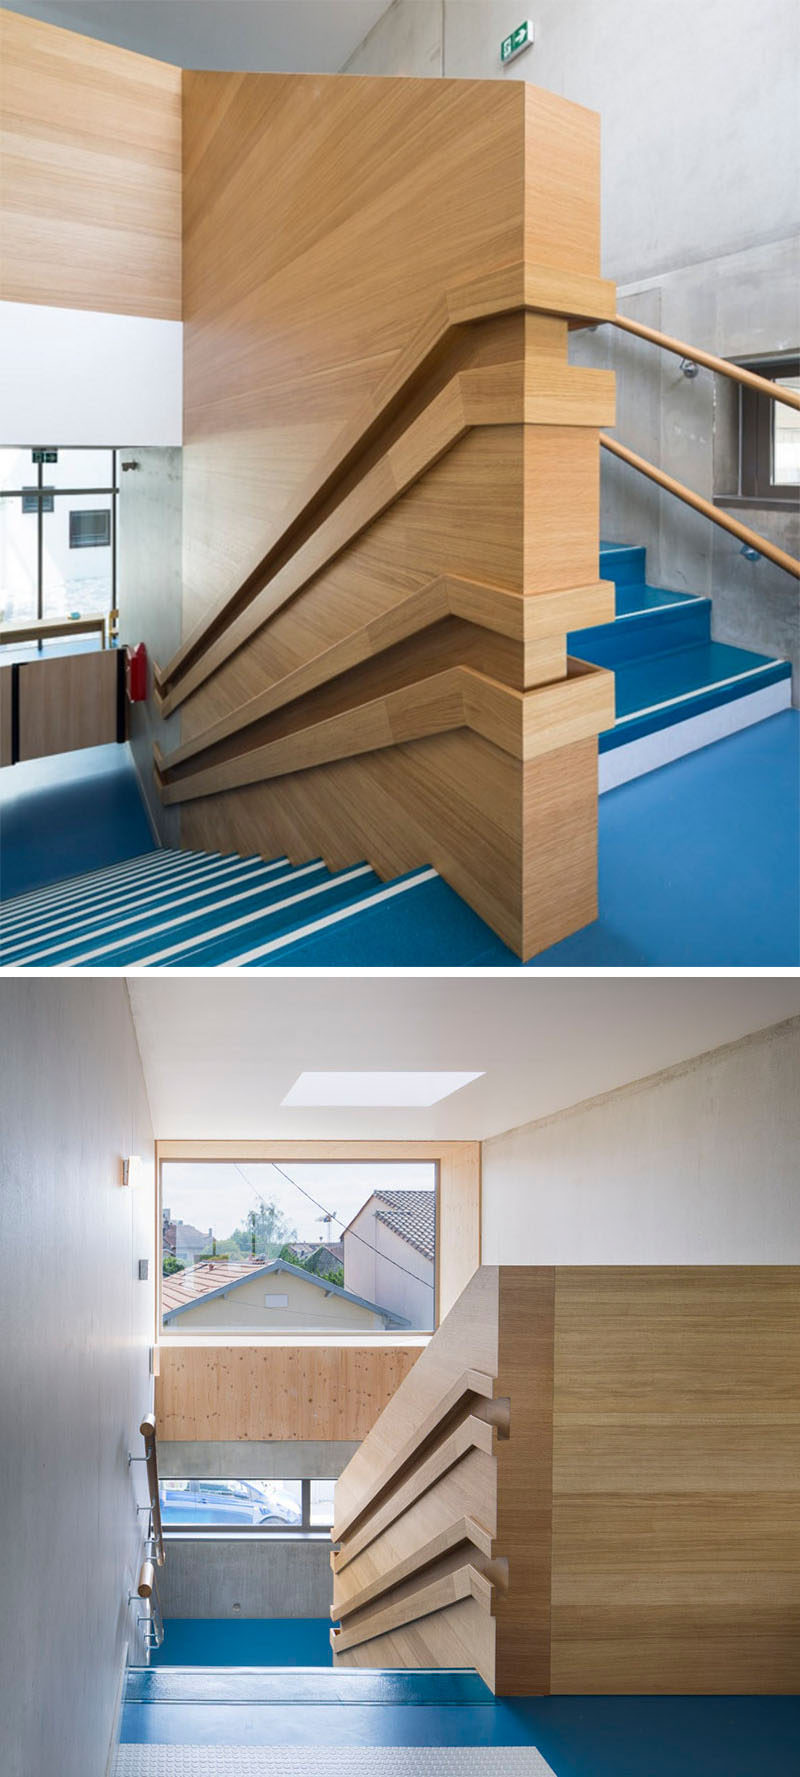 Stair Design Idea - 9 Examples Of Built-In Handrails // These dual handrails in a day care have been built into the wood wall, making sure both the children and the adults have a space to hold on to.